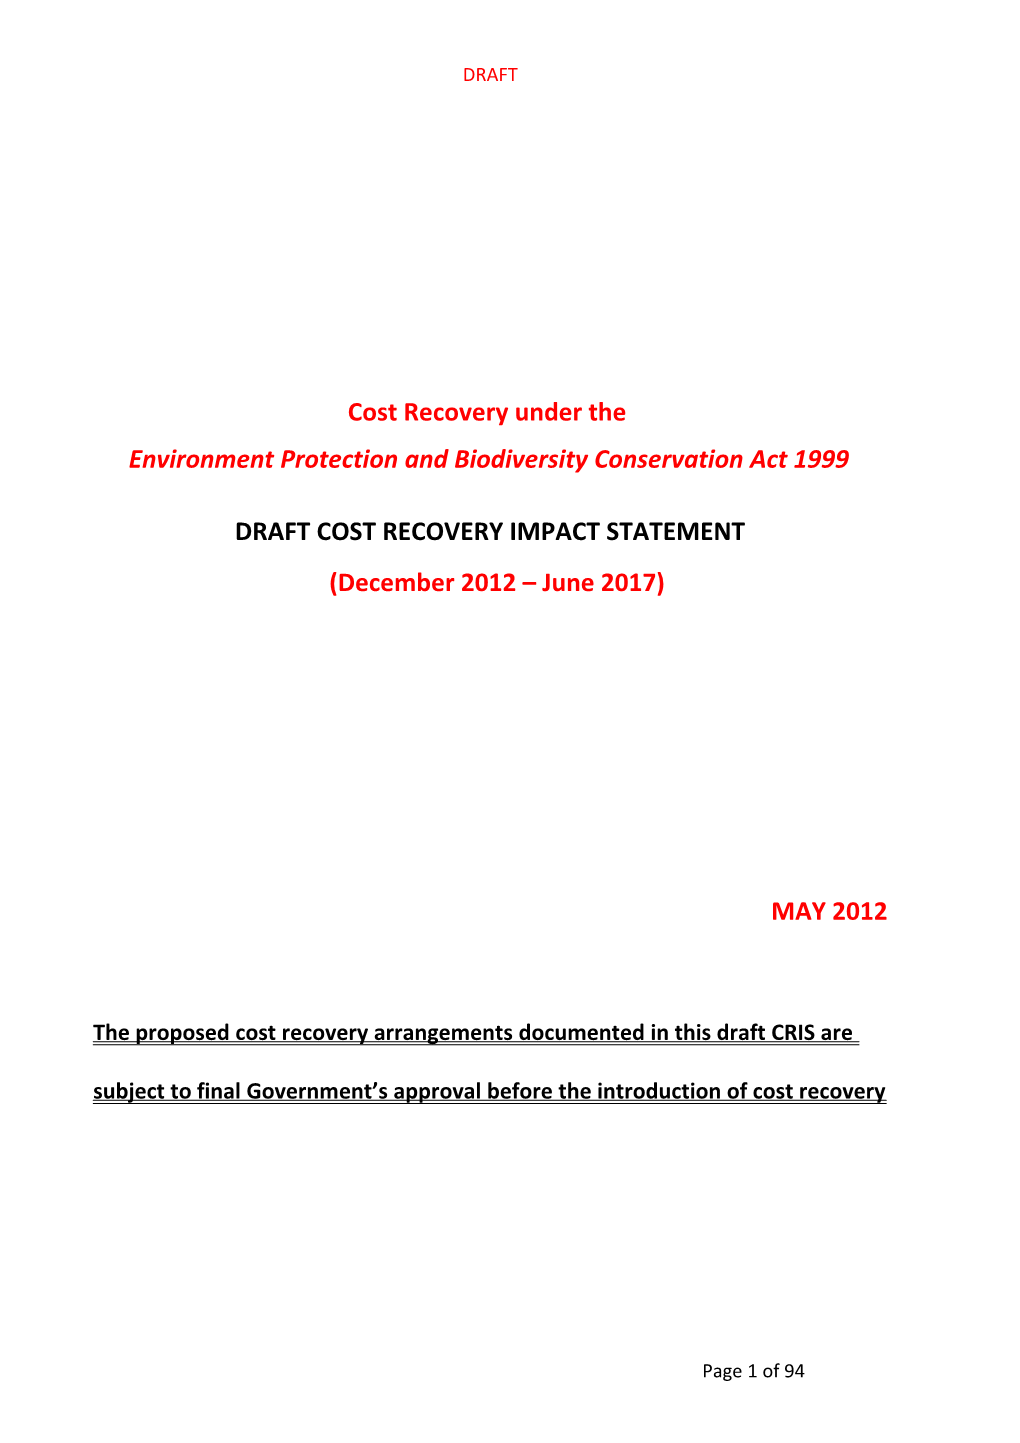 Cost Recovery Under the Environment Protection and Biodiversity Conservation Act 1999 (EPBC